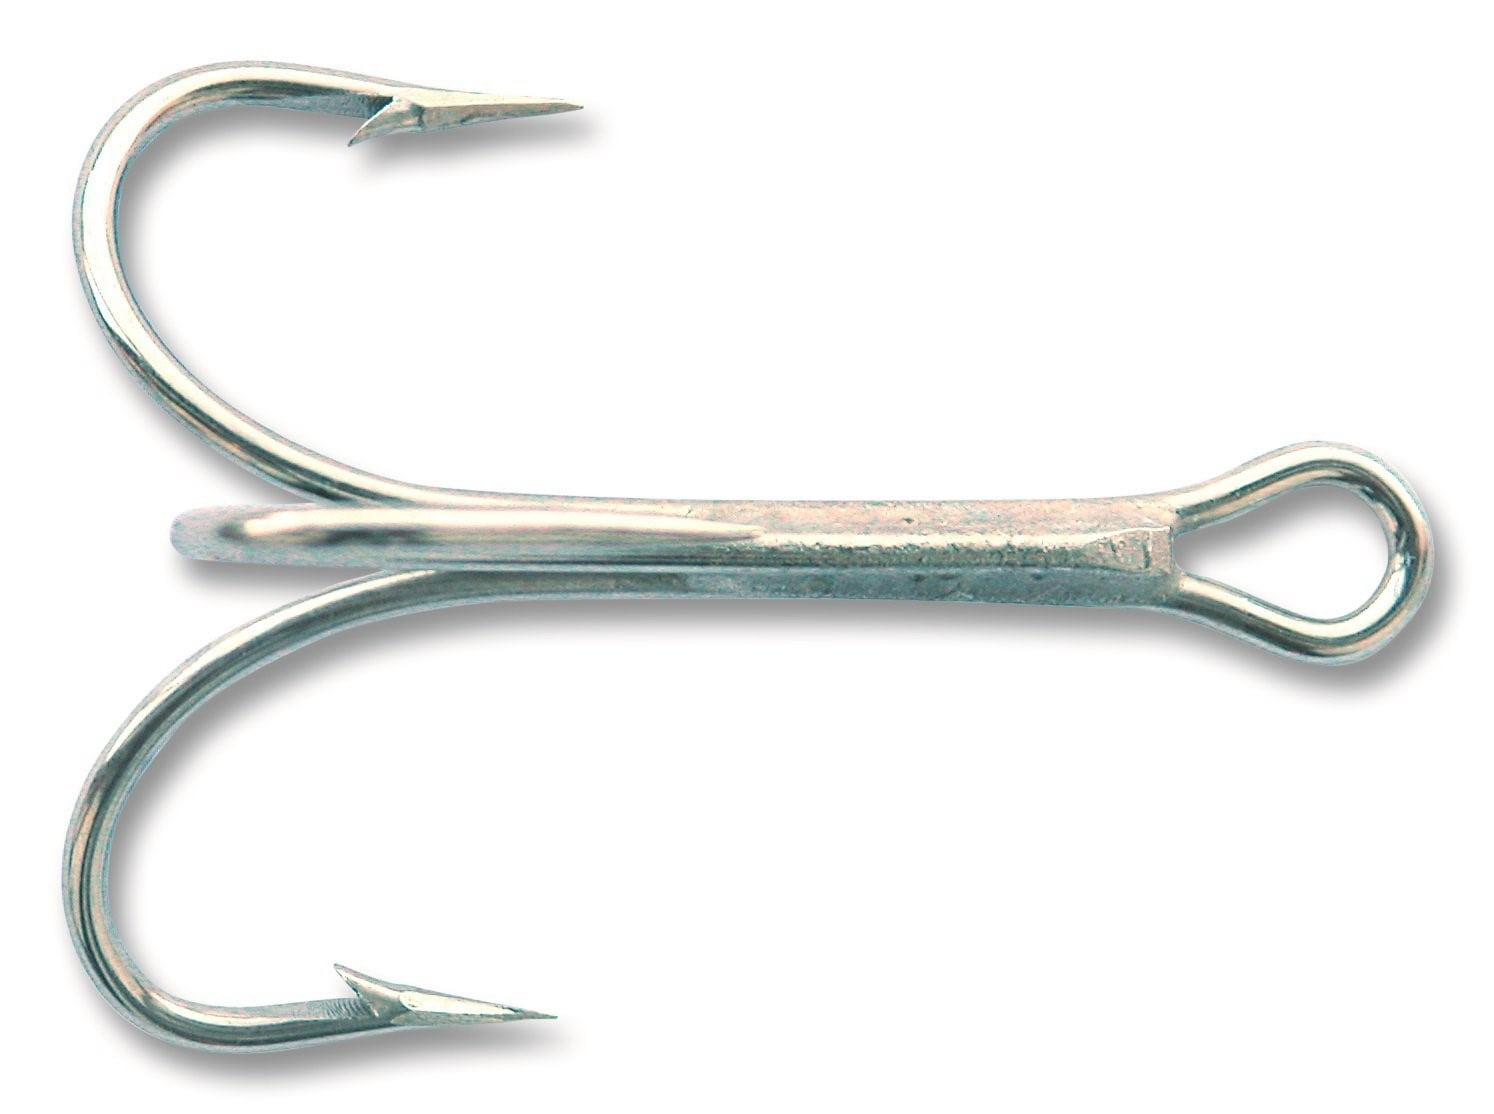 Mustad 3551 Treble Classic Hook, O'Shaughnessy - 25 Per Pack